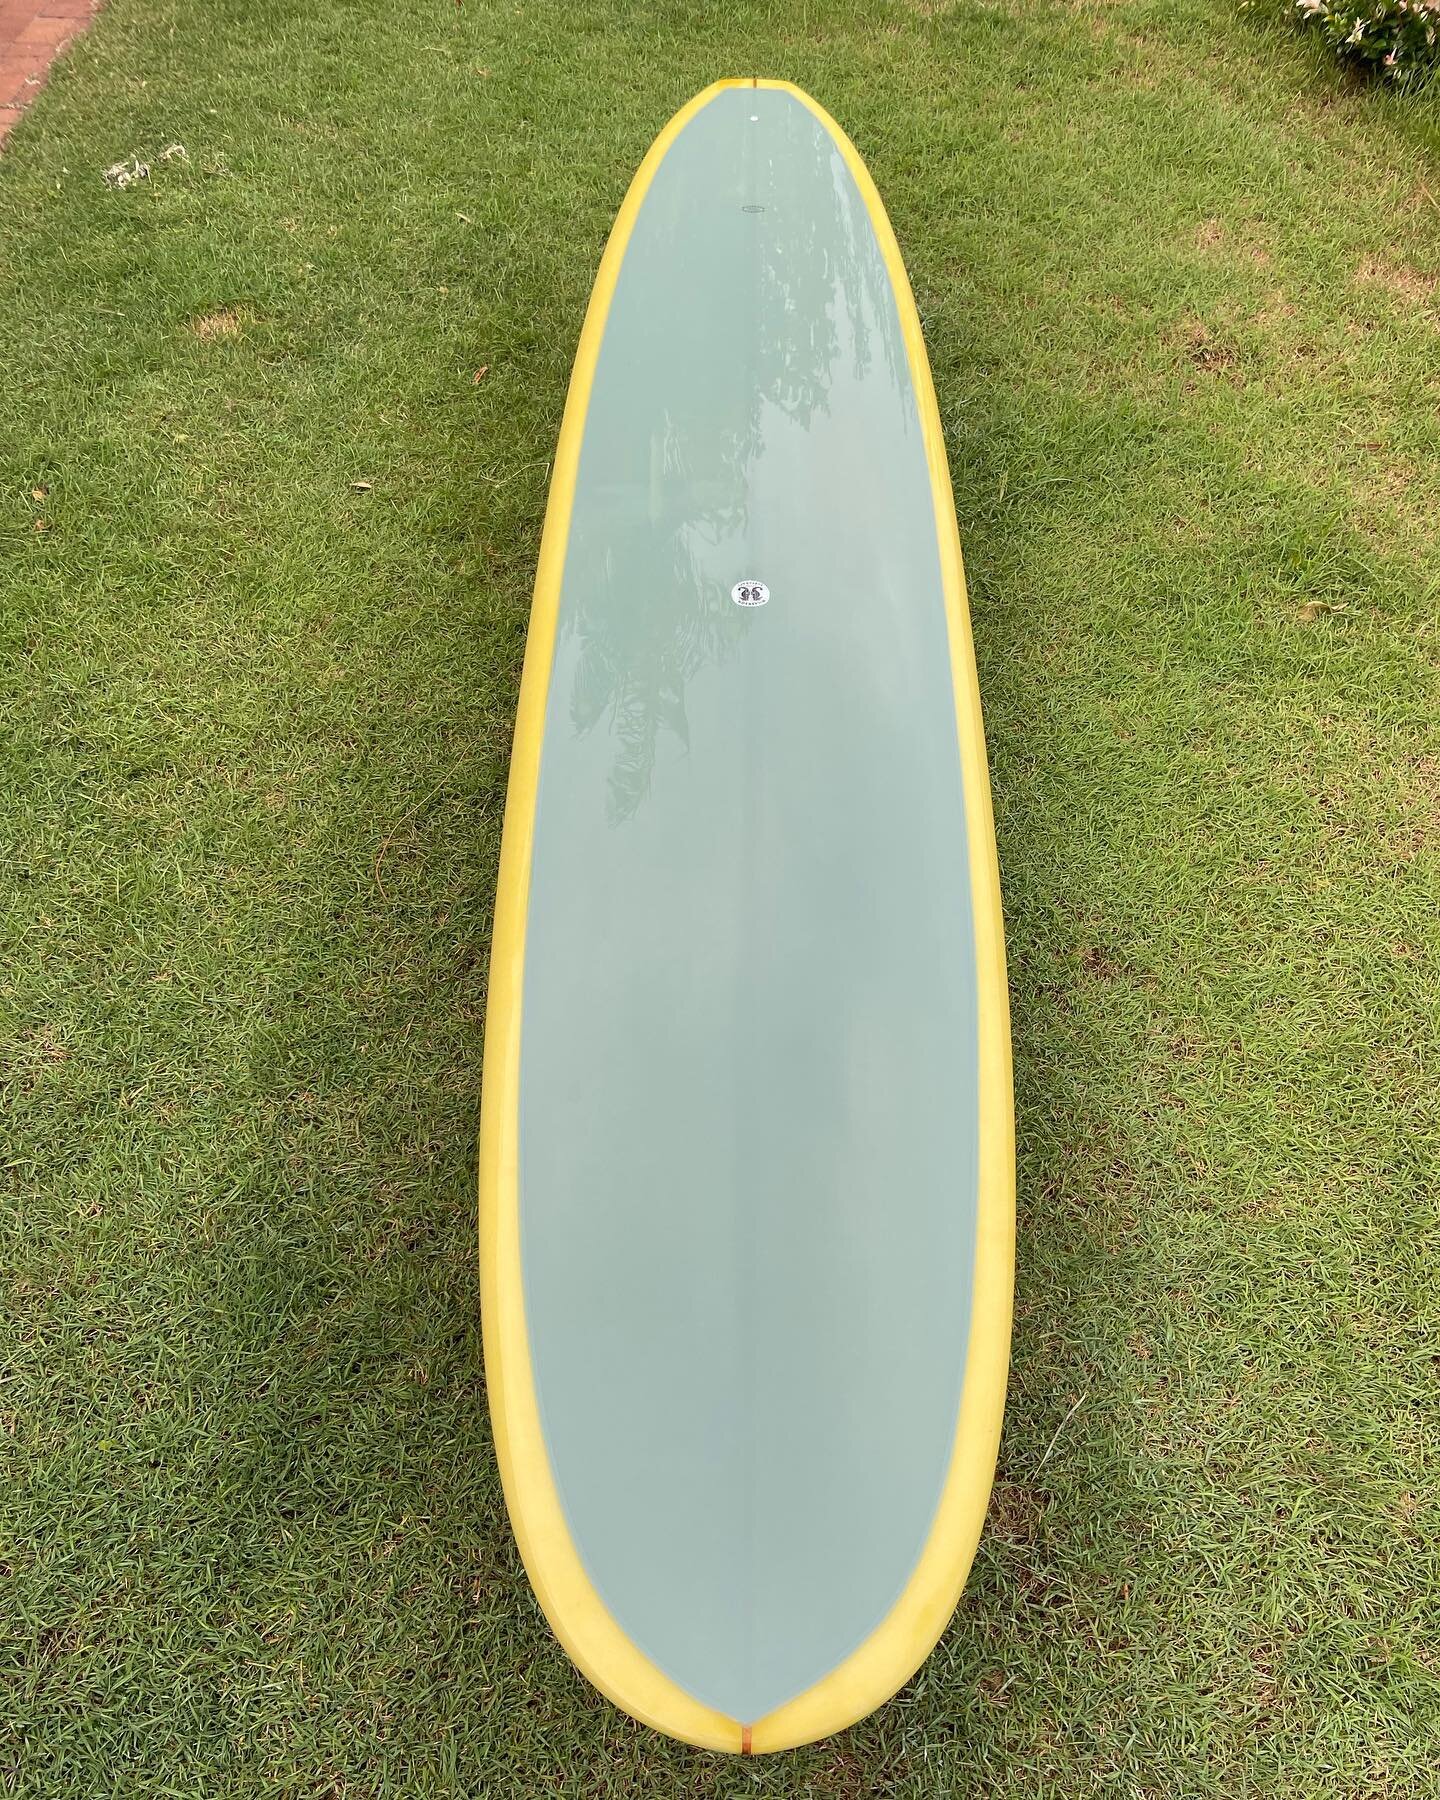 9&rsquo;4&rdquo; &bull; 22 ⅝ &bull;  2 13/16 &bull; for @sunburntmess.surf in #Bondi Beach NSW.  This board features a clean semi #pig outline balanced rocker with refined 50/50 rails, single nose concave entry splitting a rolled vee bottom.  If your